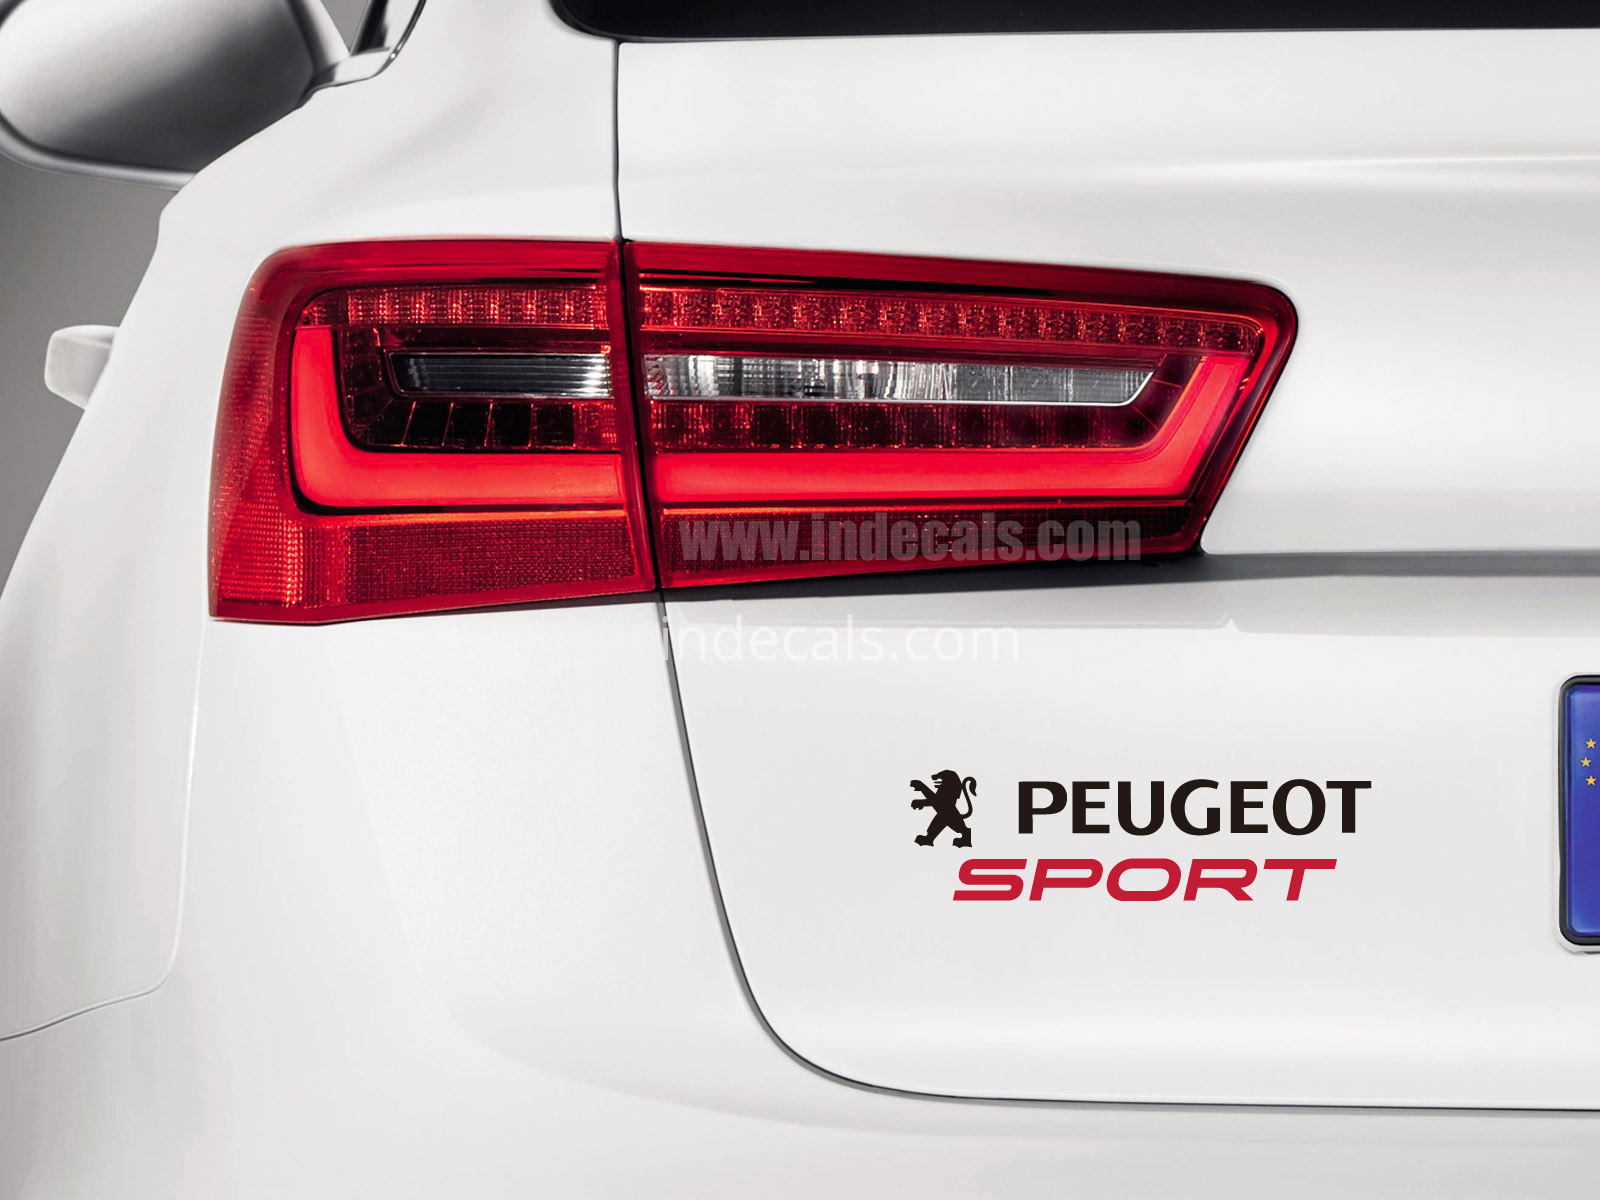 1 x Peugeot Sports Sticker for Trunk - Black & Red